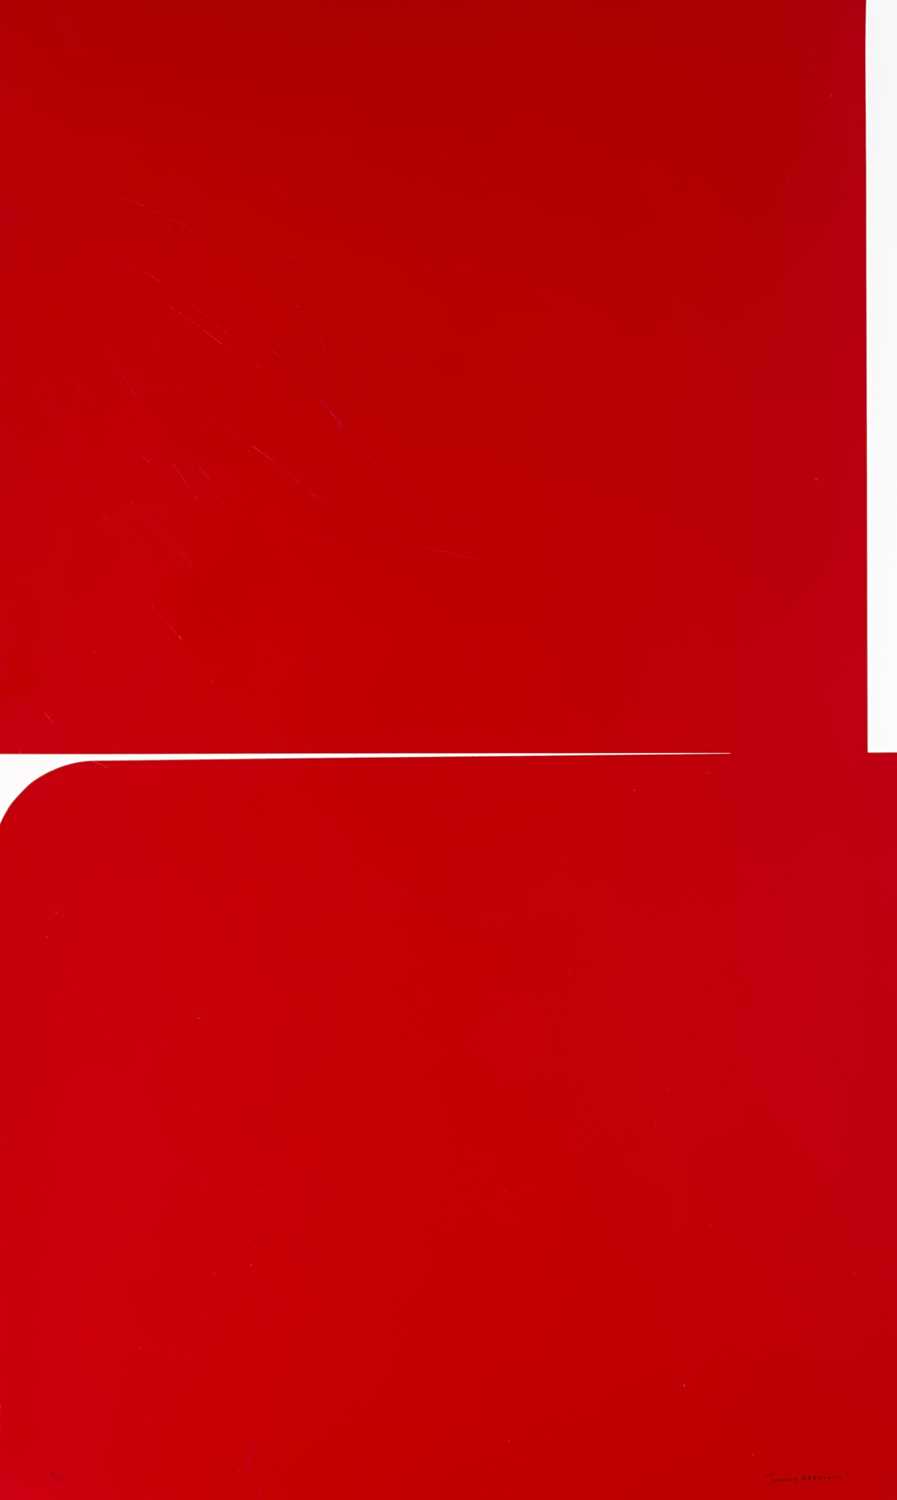 Lot 229 - Johnny Abrahams (American 1979-), 'Untitled (Red)', 2021